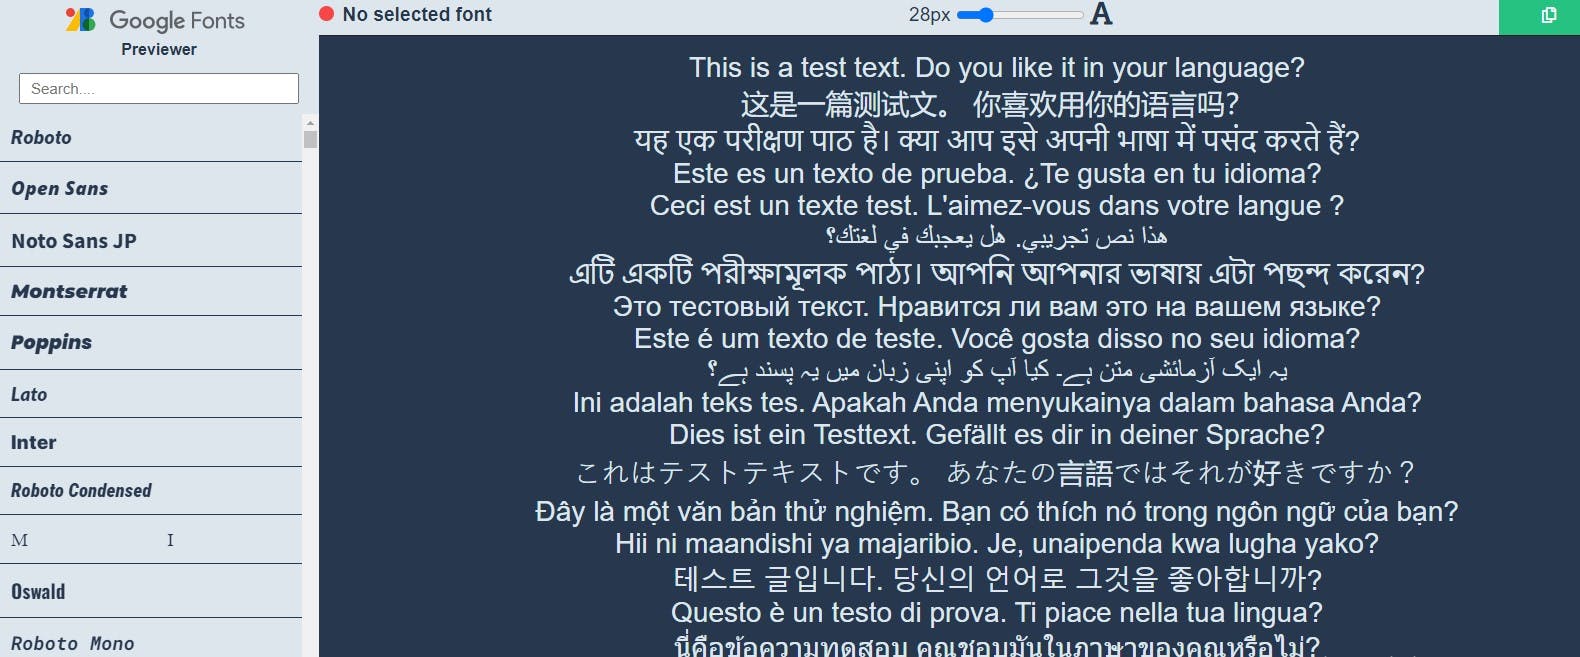 Google Fonts Previewer: Preview Fonts in Multiple Languages